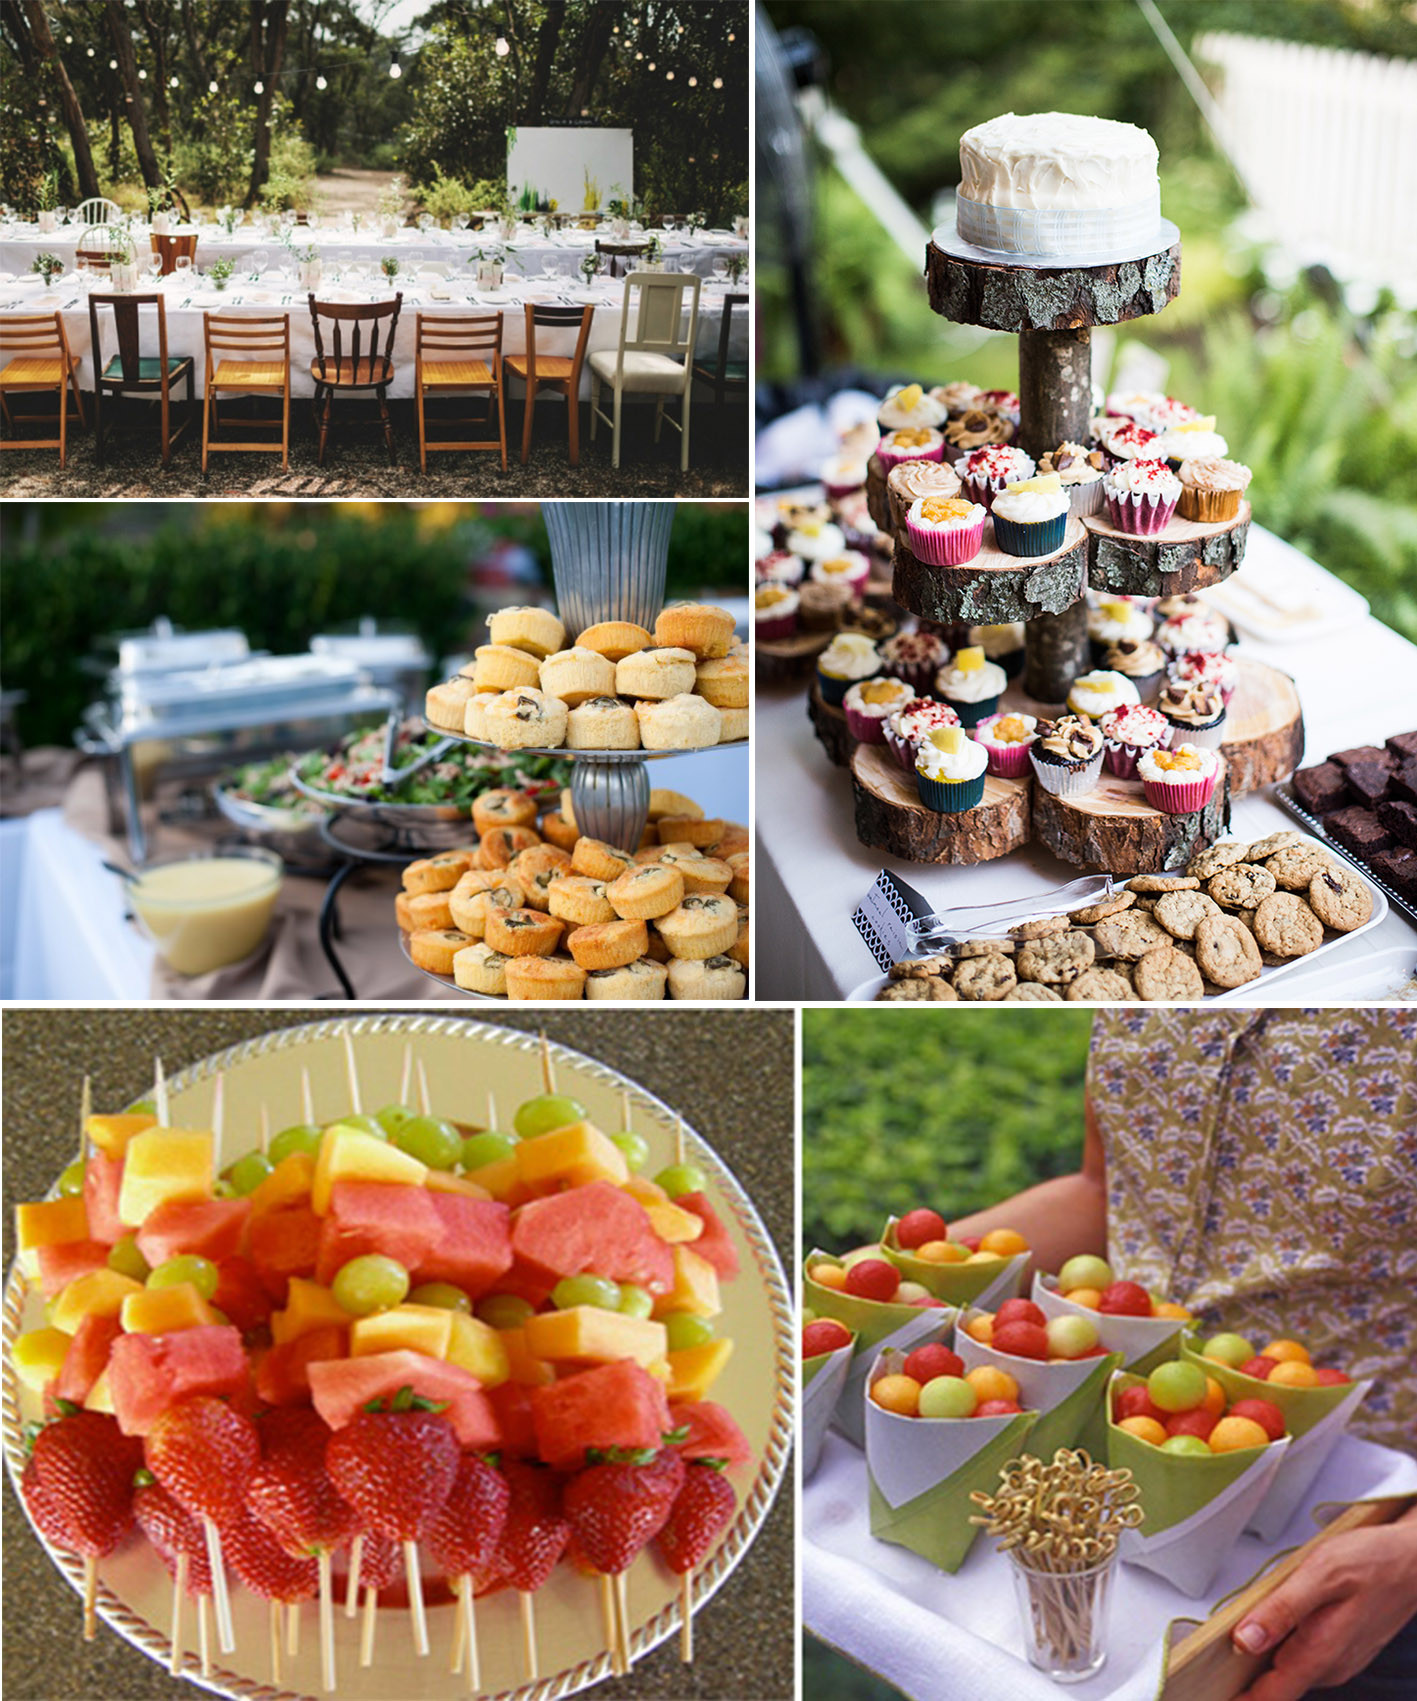 Engagement Party Catering Ideas
 How to play a backyard themed wedding – lianggeyuan123